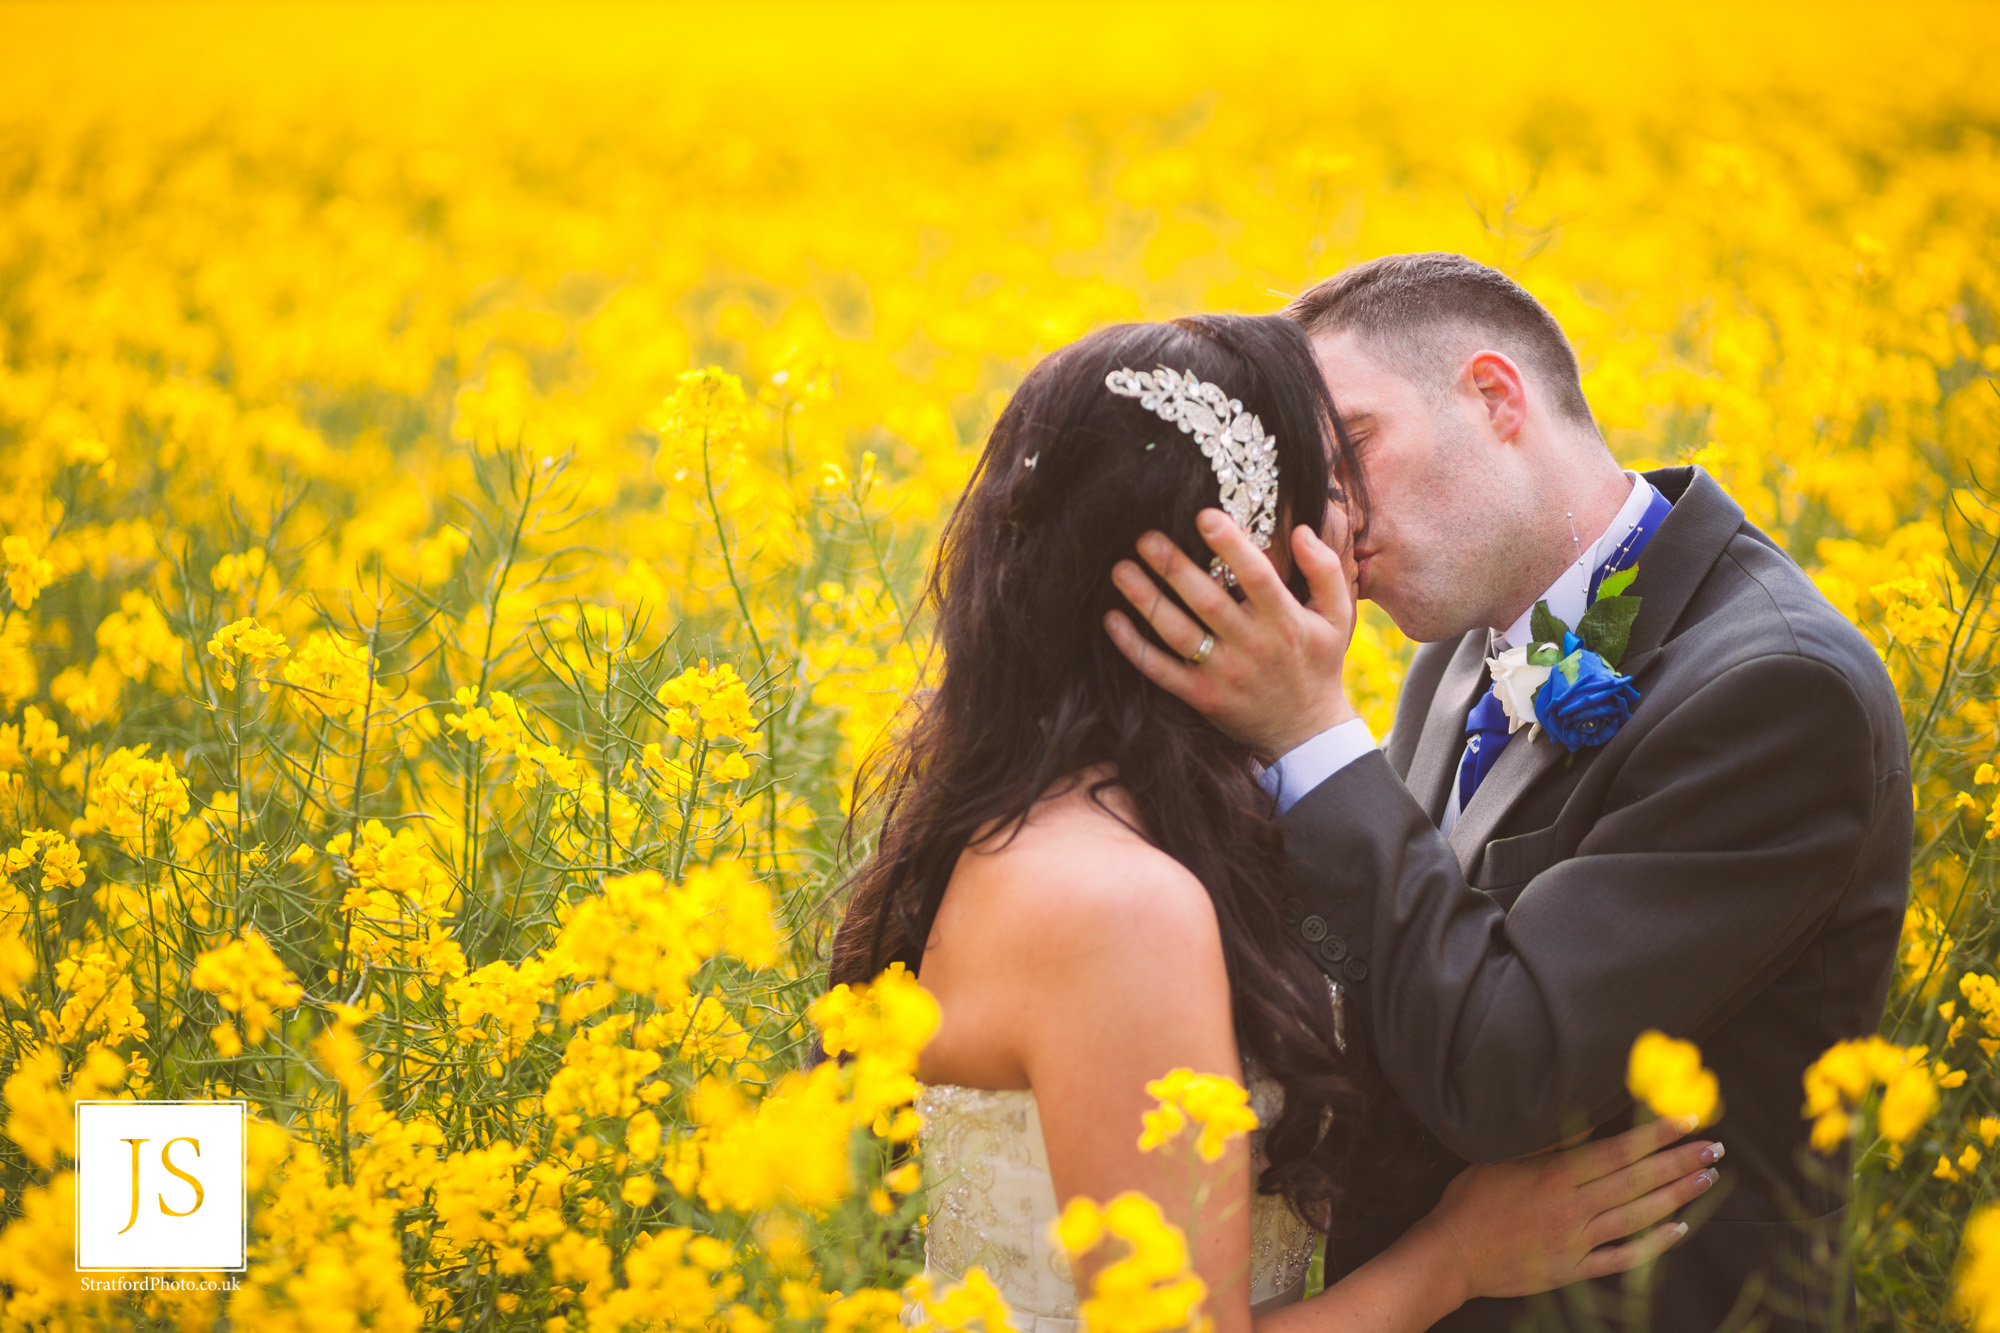 A groom kisses his bride passionately in a field of yellow rapeseed.jpg